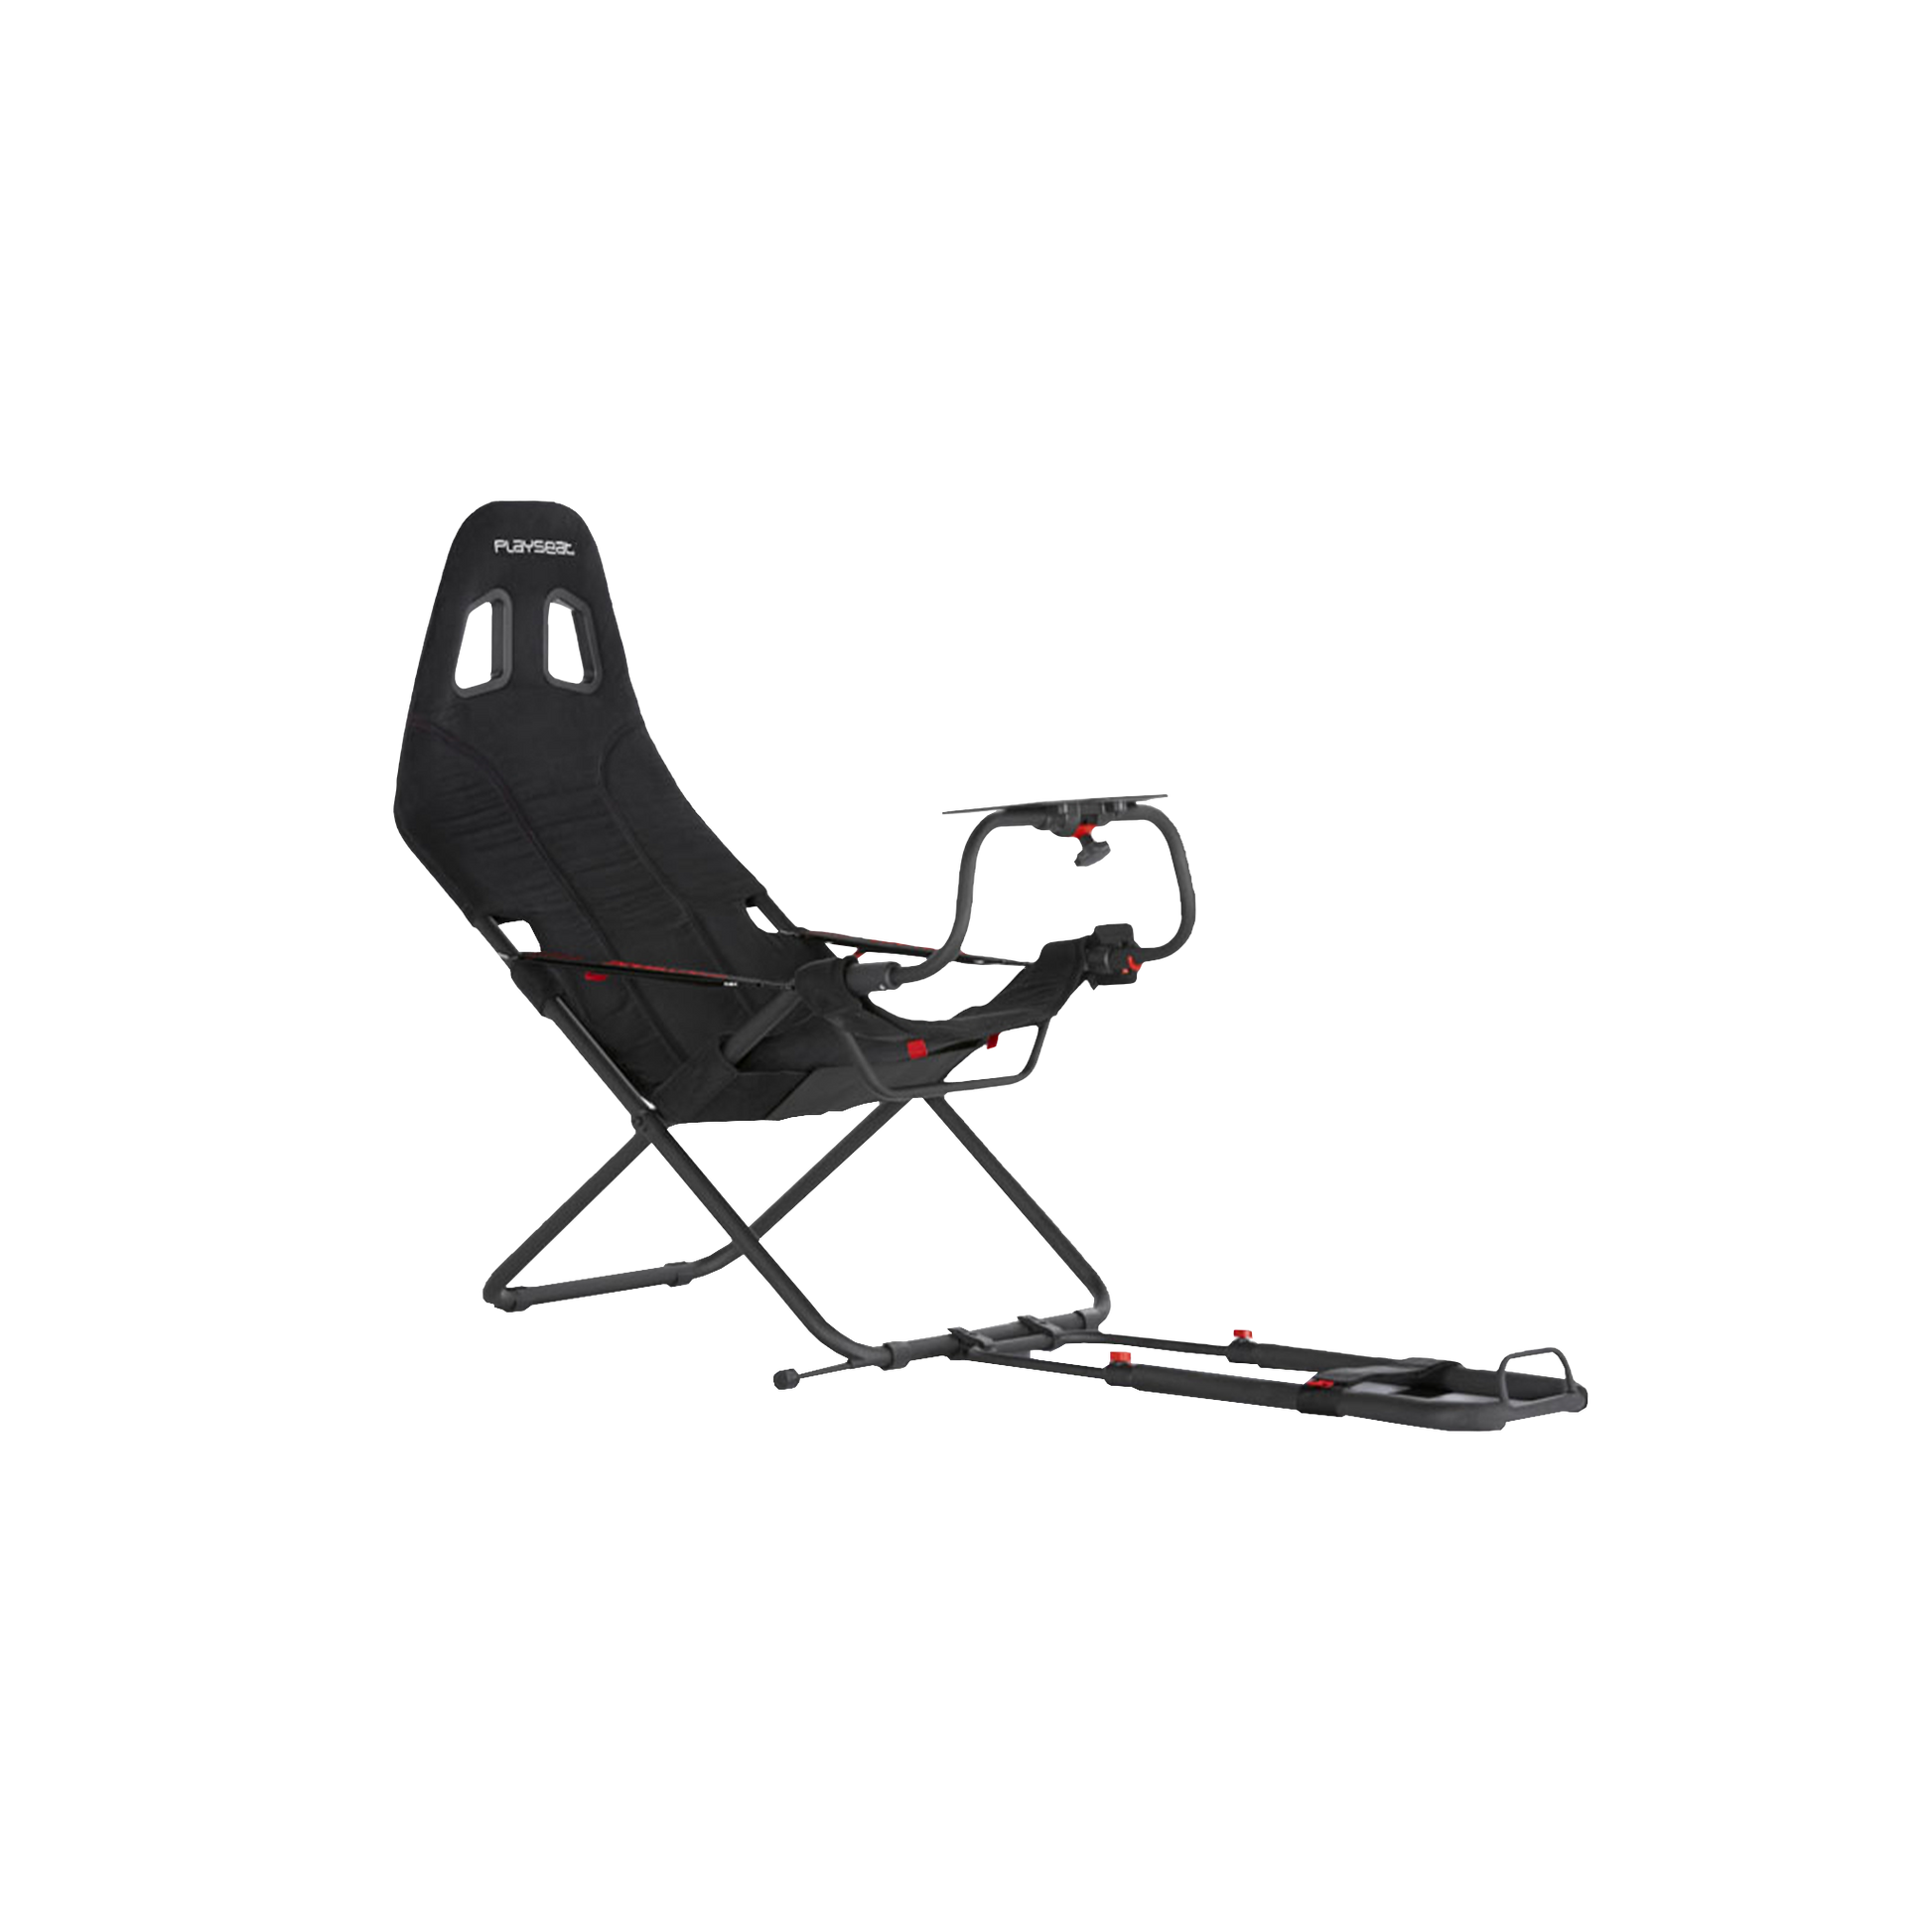 Playseat F1 Racing Simulator Seat with 3 Monitors — FaceQuad